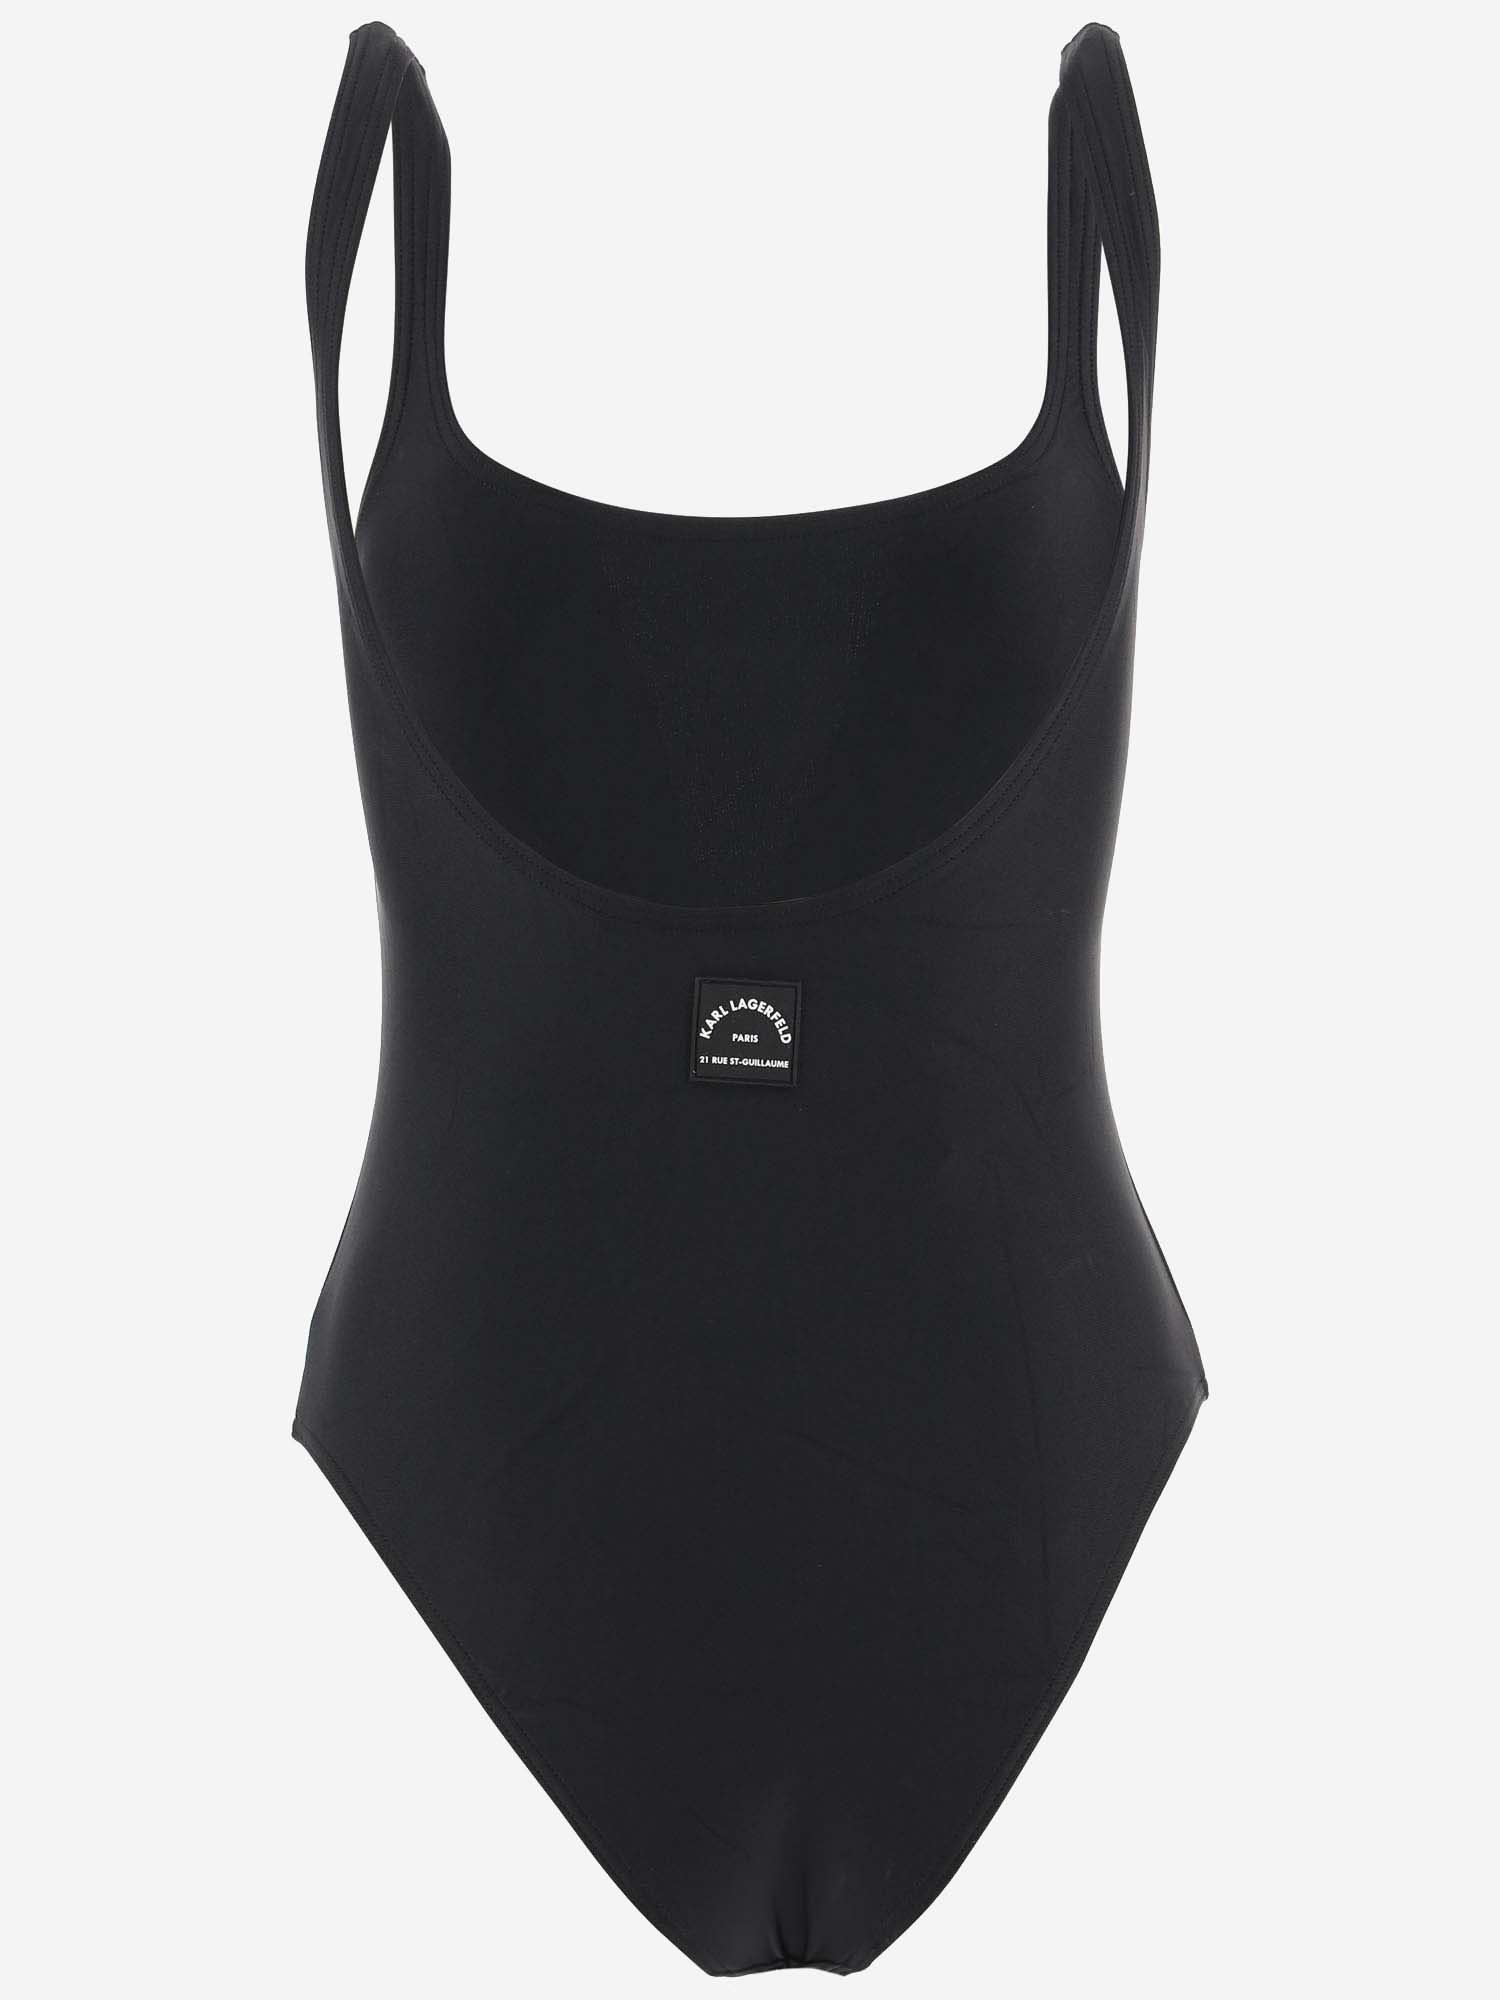 Shop Karl Lagerfeld One-piece Swimsuit Rue St-guillaume In Black